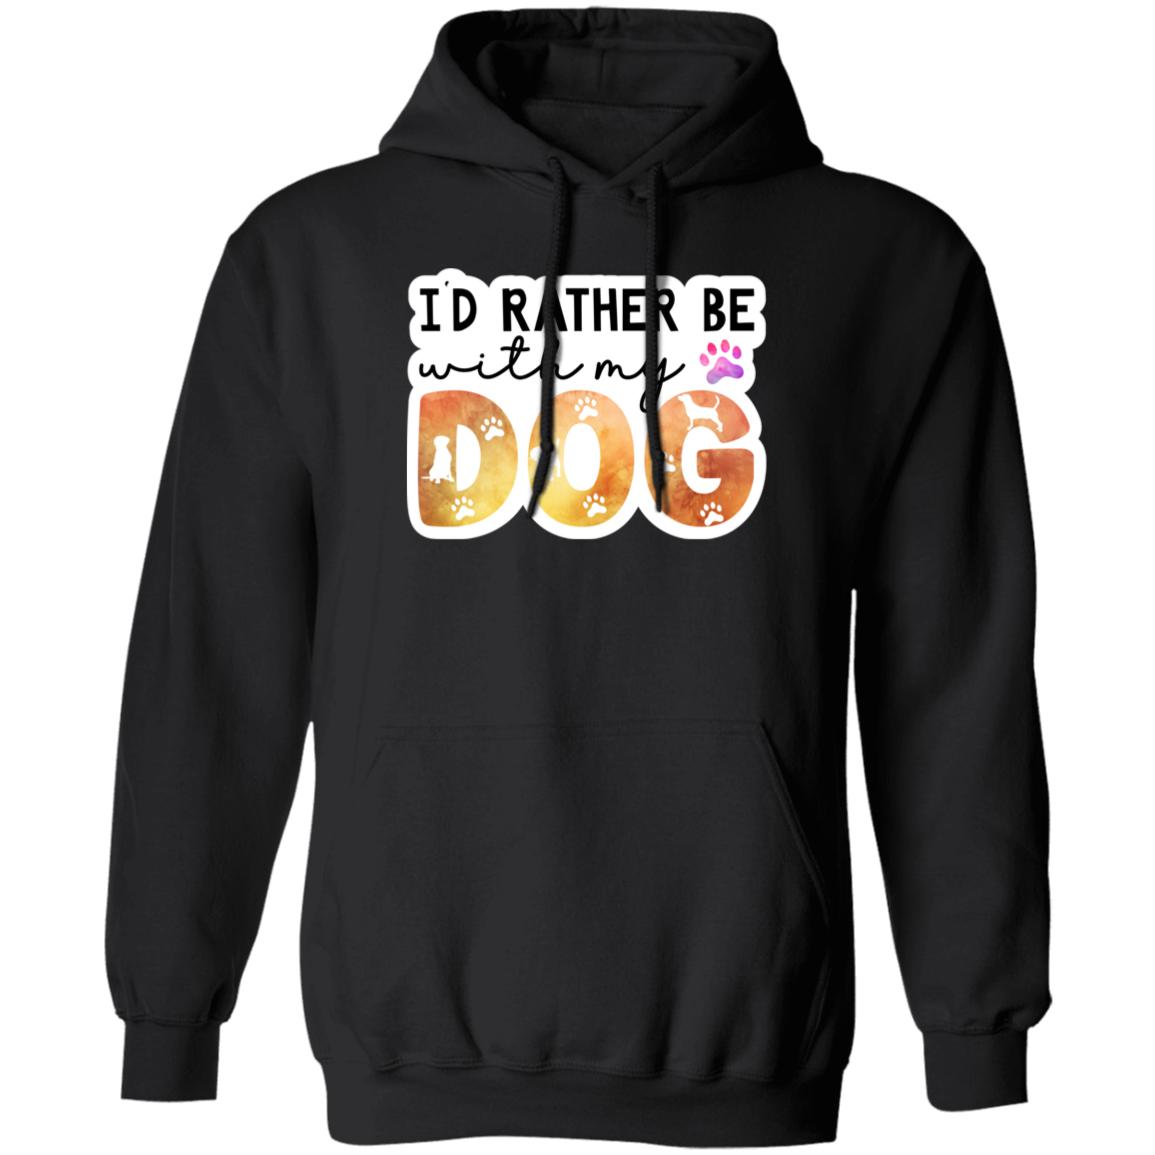 I'd Rather Be With My Dog Watercolor Pullover Hoodie Hooded Sweatshirt